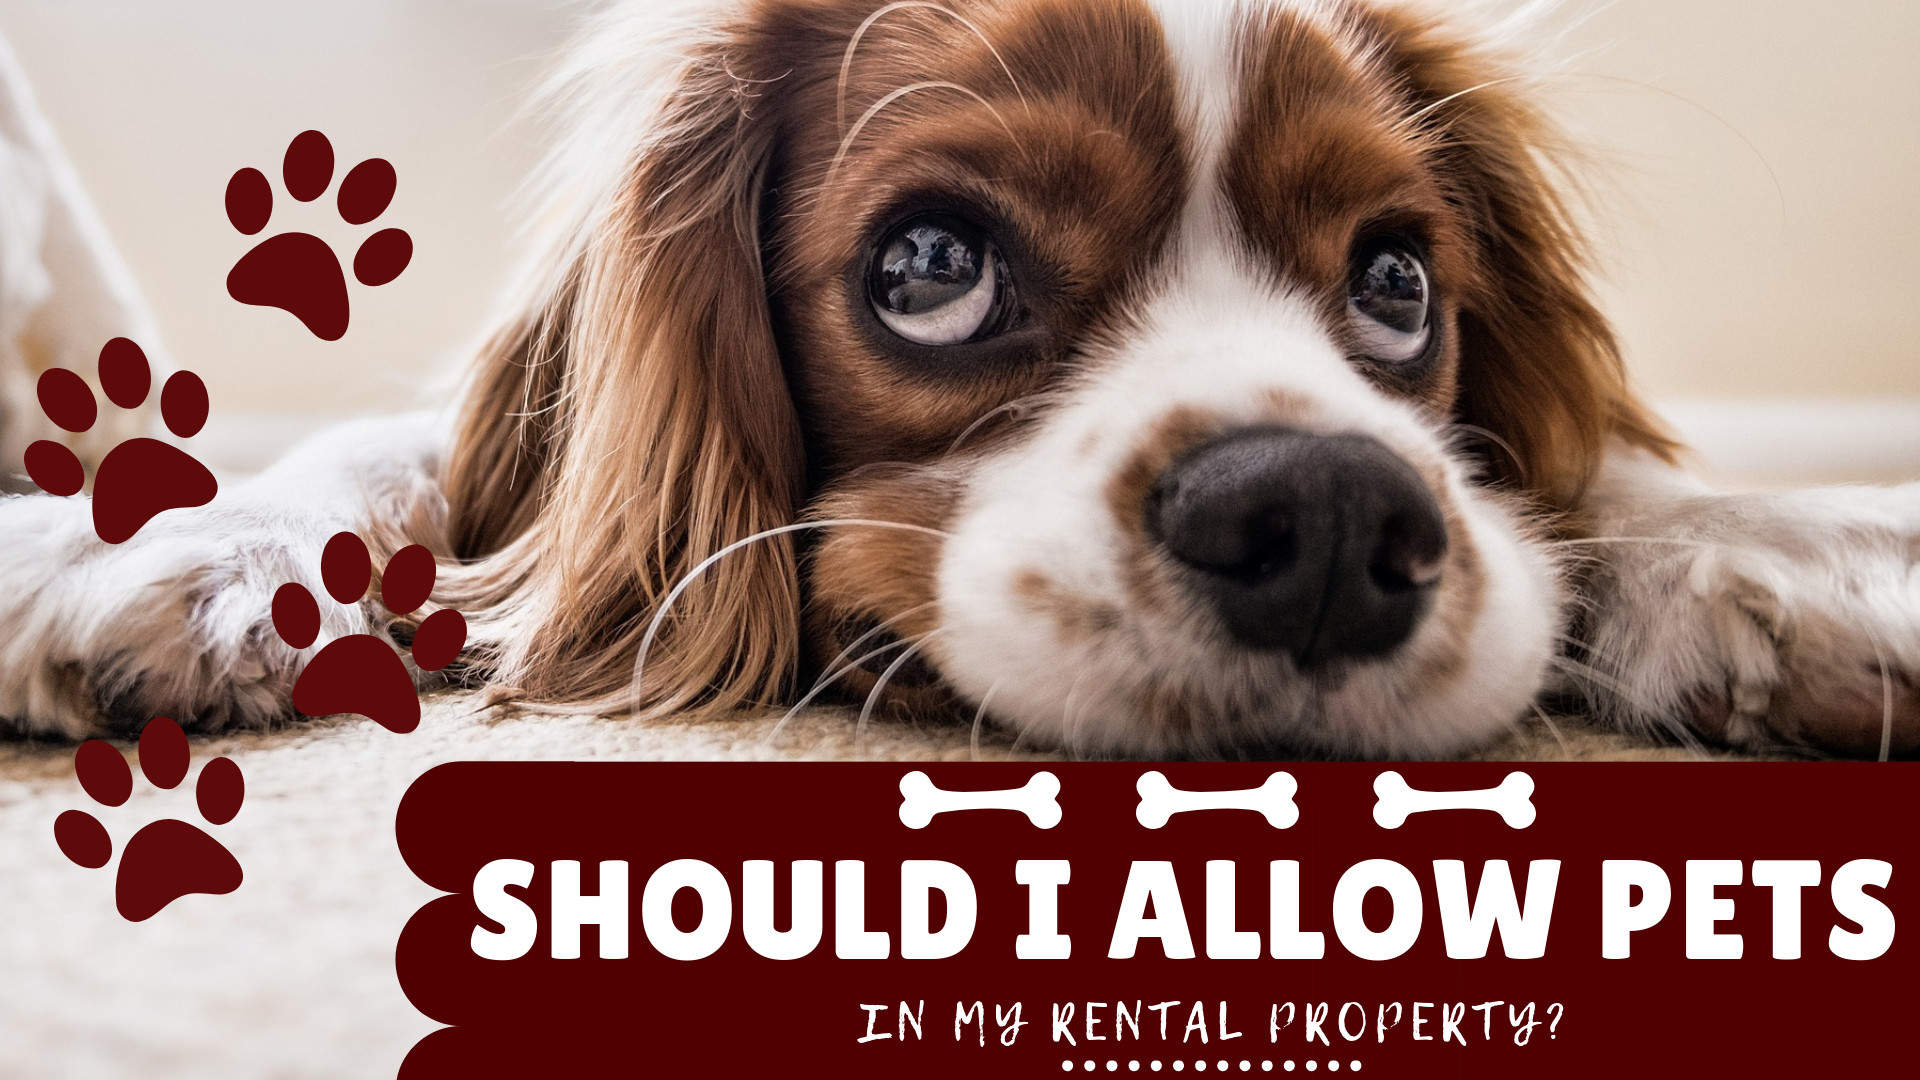 Should I Allow Pets in My Rental Property?